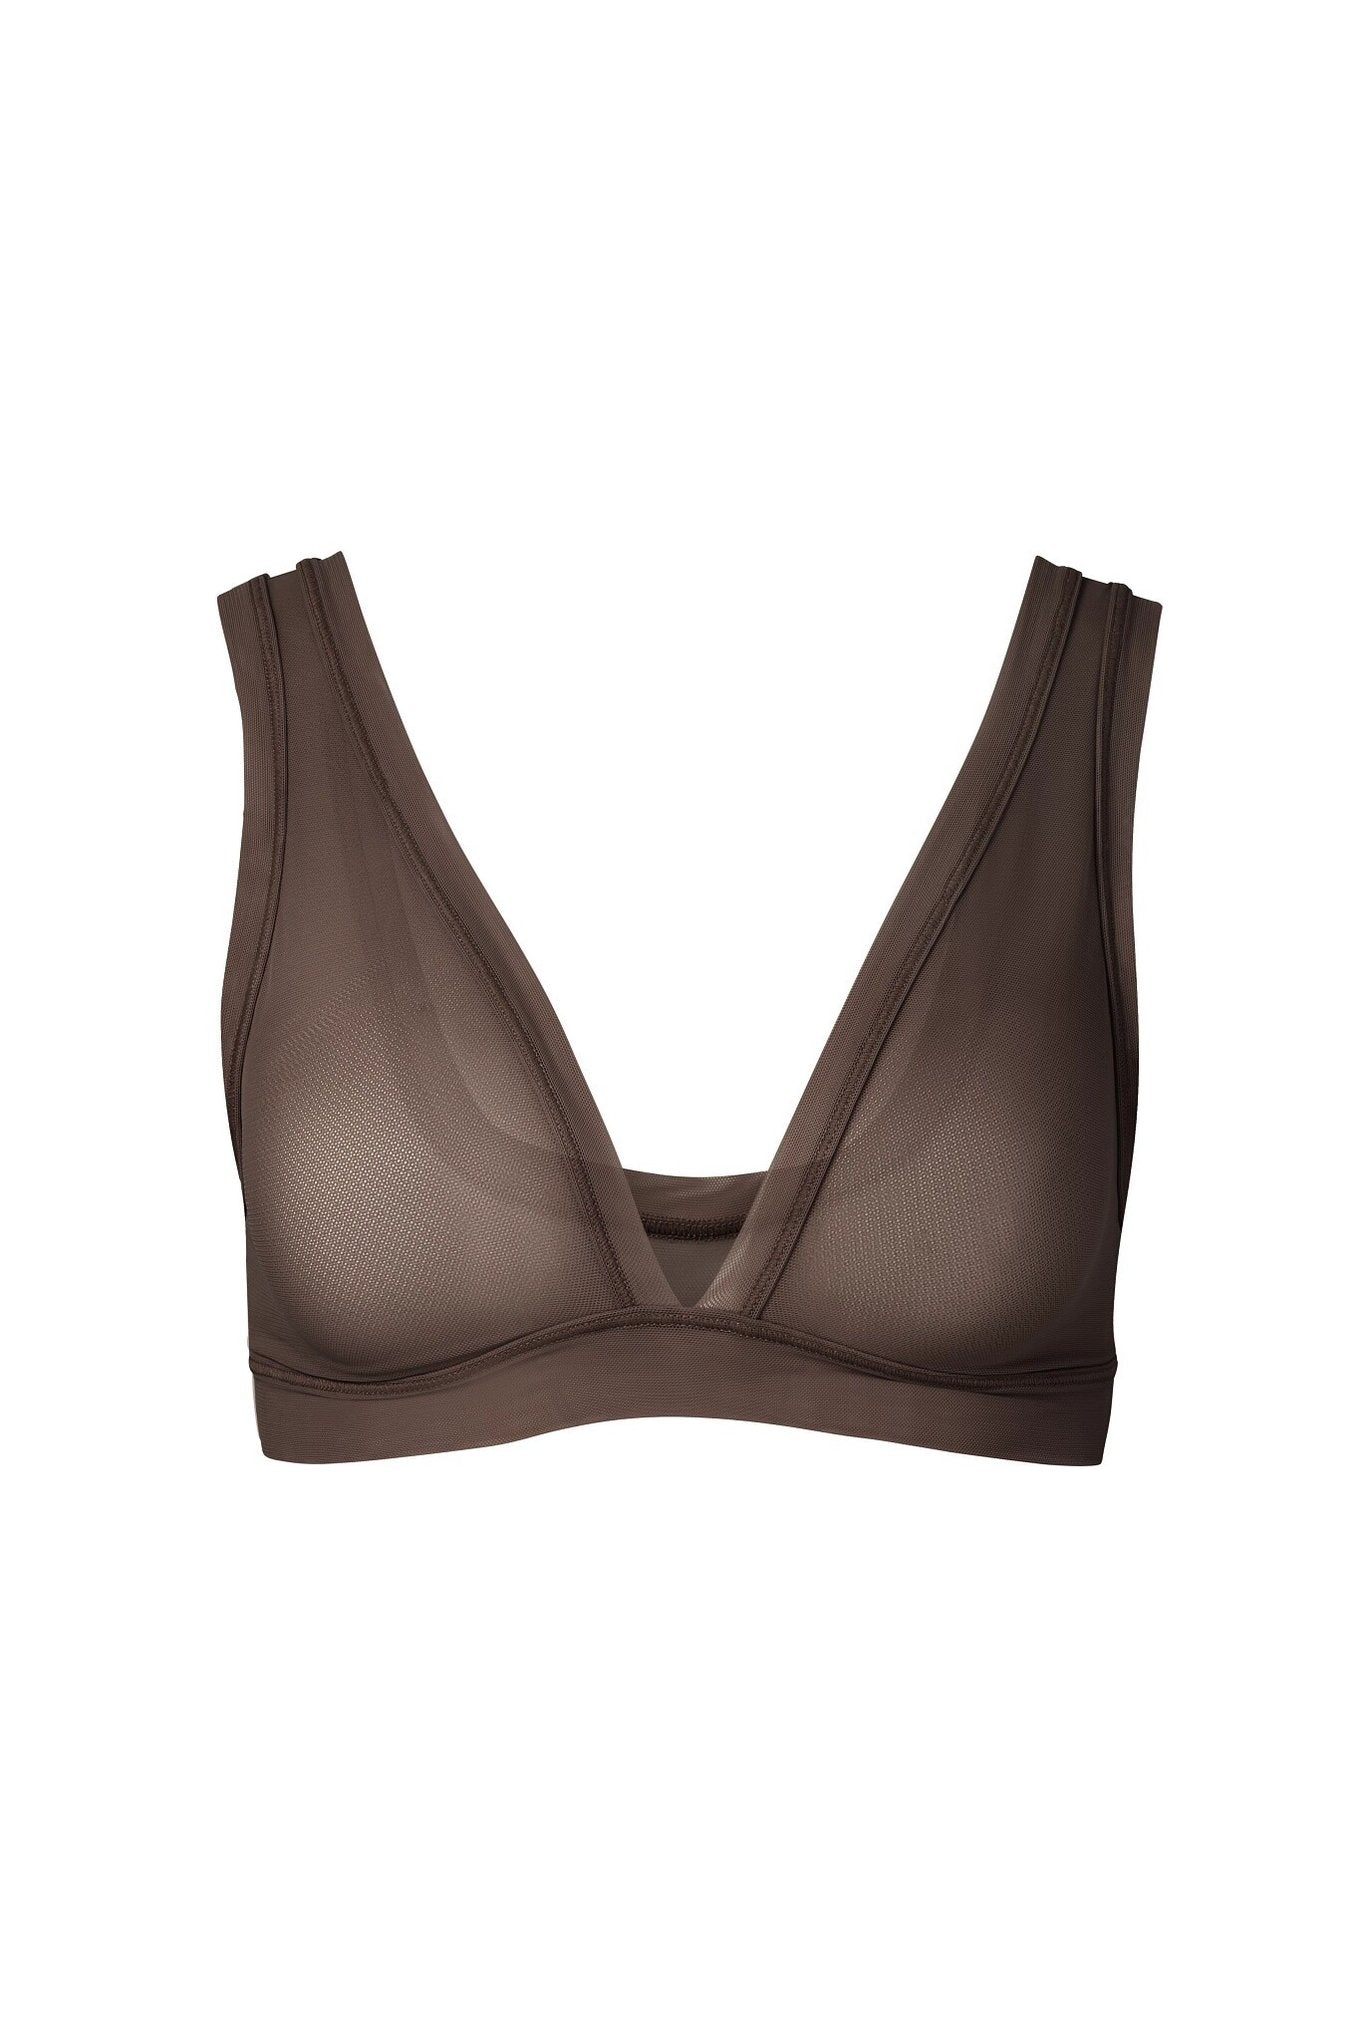 nueskin Italia Mesh Wireless Triangle Bralette in color Deep Taupe and shape triangle